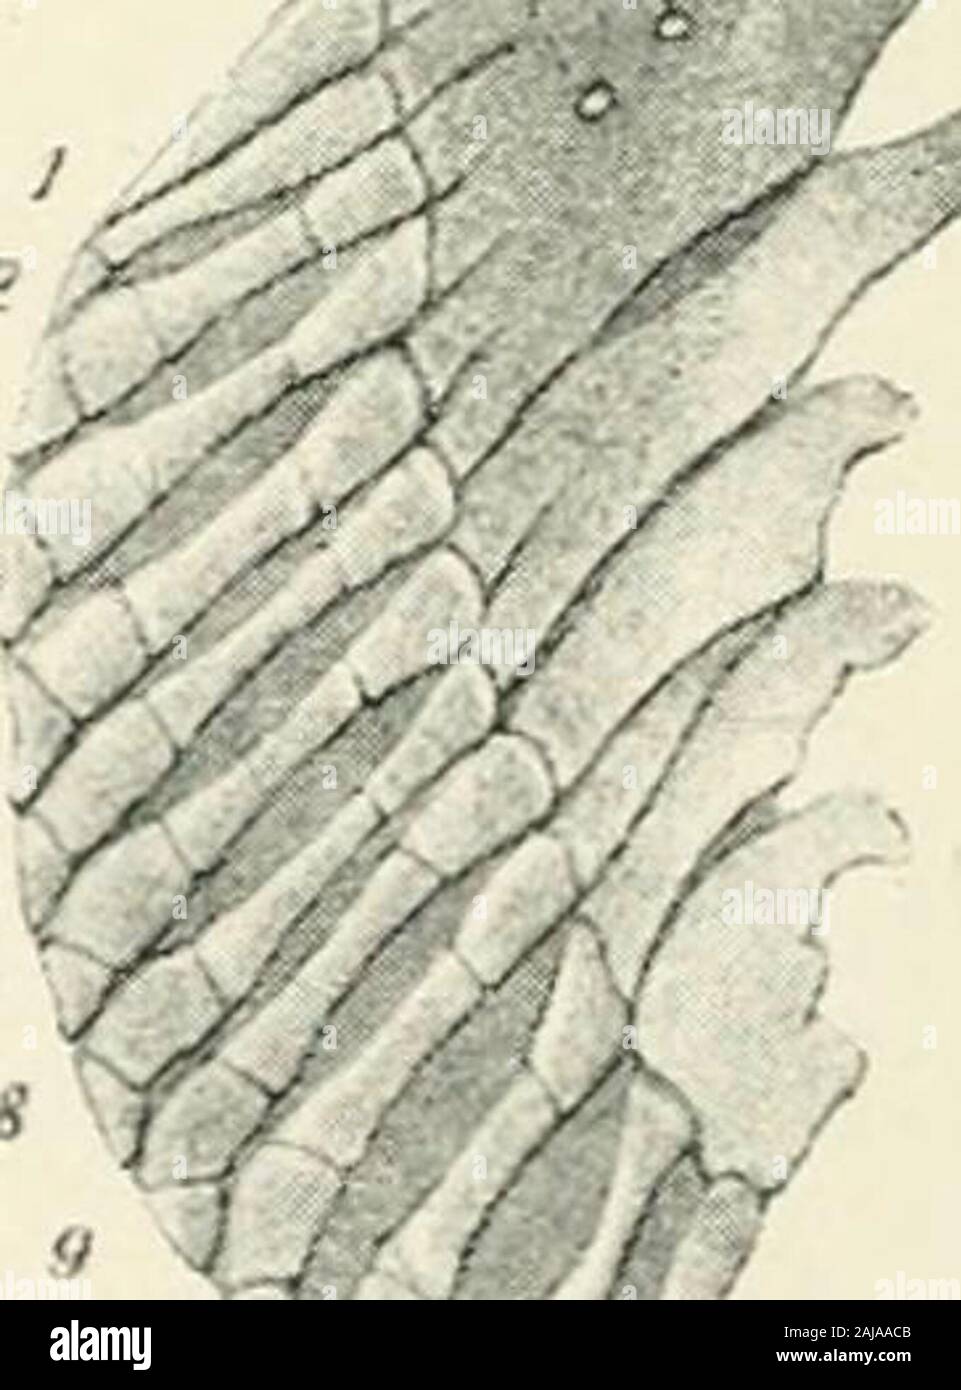 A treatise on zoology . Fig. 2; Ventral view of the cartilaginous skeleton of the pelvicgirdle and fin of Scaphirhytichus. (After Raiitenfeld.)Pm, median, and Pd, dorsal process of girdle ; F, nerve-foramen ; 1-9, radials. an the loss of the post-axilradials (Gegenbaur [158,162], Braus [48]; see All distinct trace of an axis has disappeared in the pelvic the Holostei, ,. fj p. 108)fin of where the few remain-ing radials aiticulatedirectly Avith the pelvicbone (Figs. 245-8).This is also the casewith the pectoral finof the Teleostei (Figs.243,480). Butin^mmand Lepidosteus a basalelement persists Stock Photo